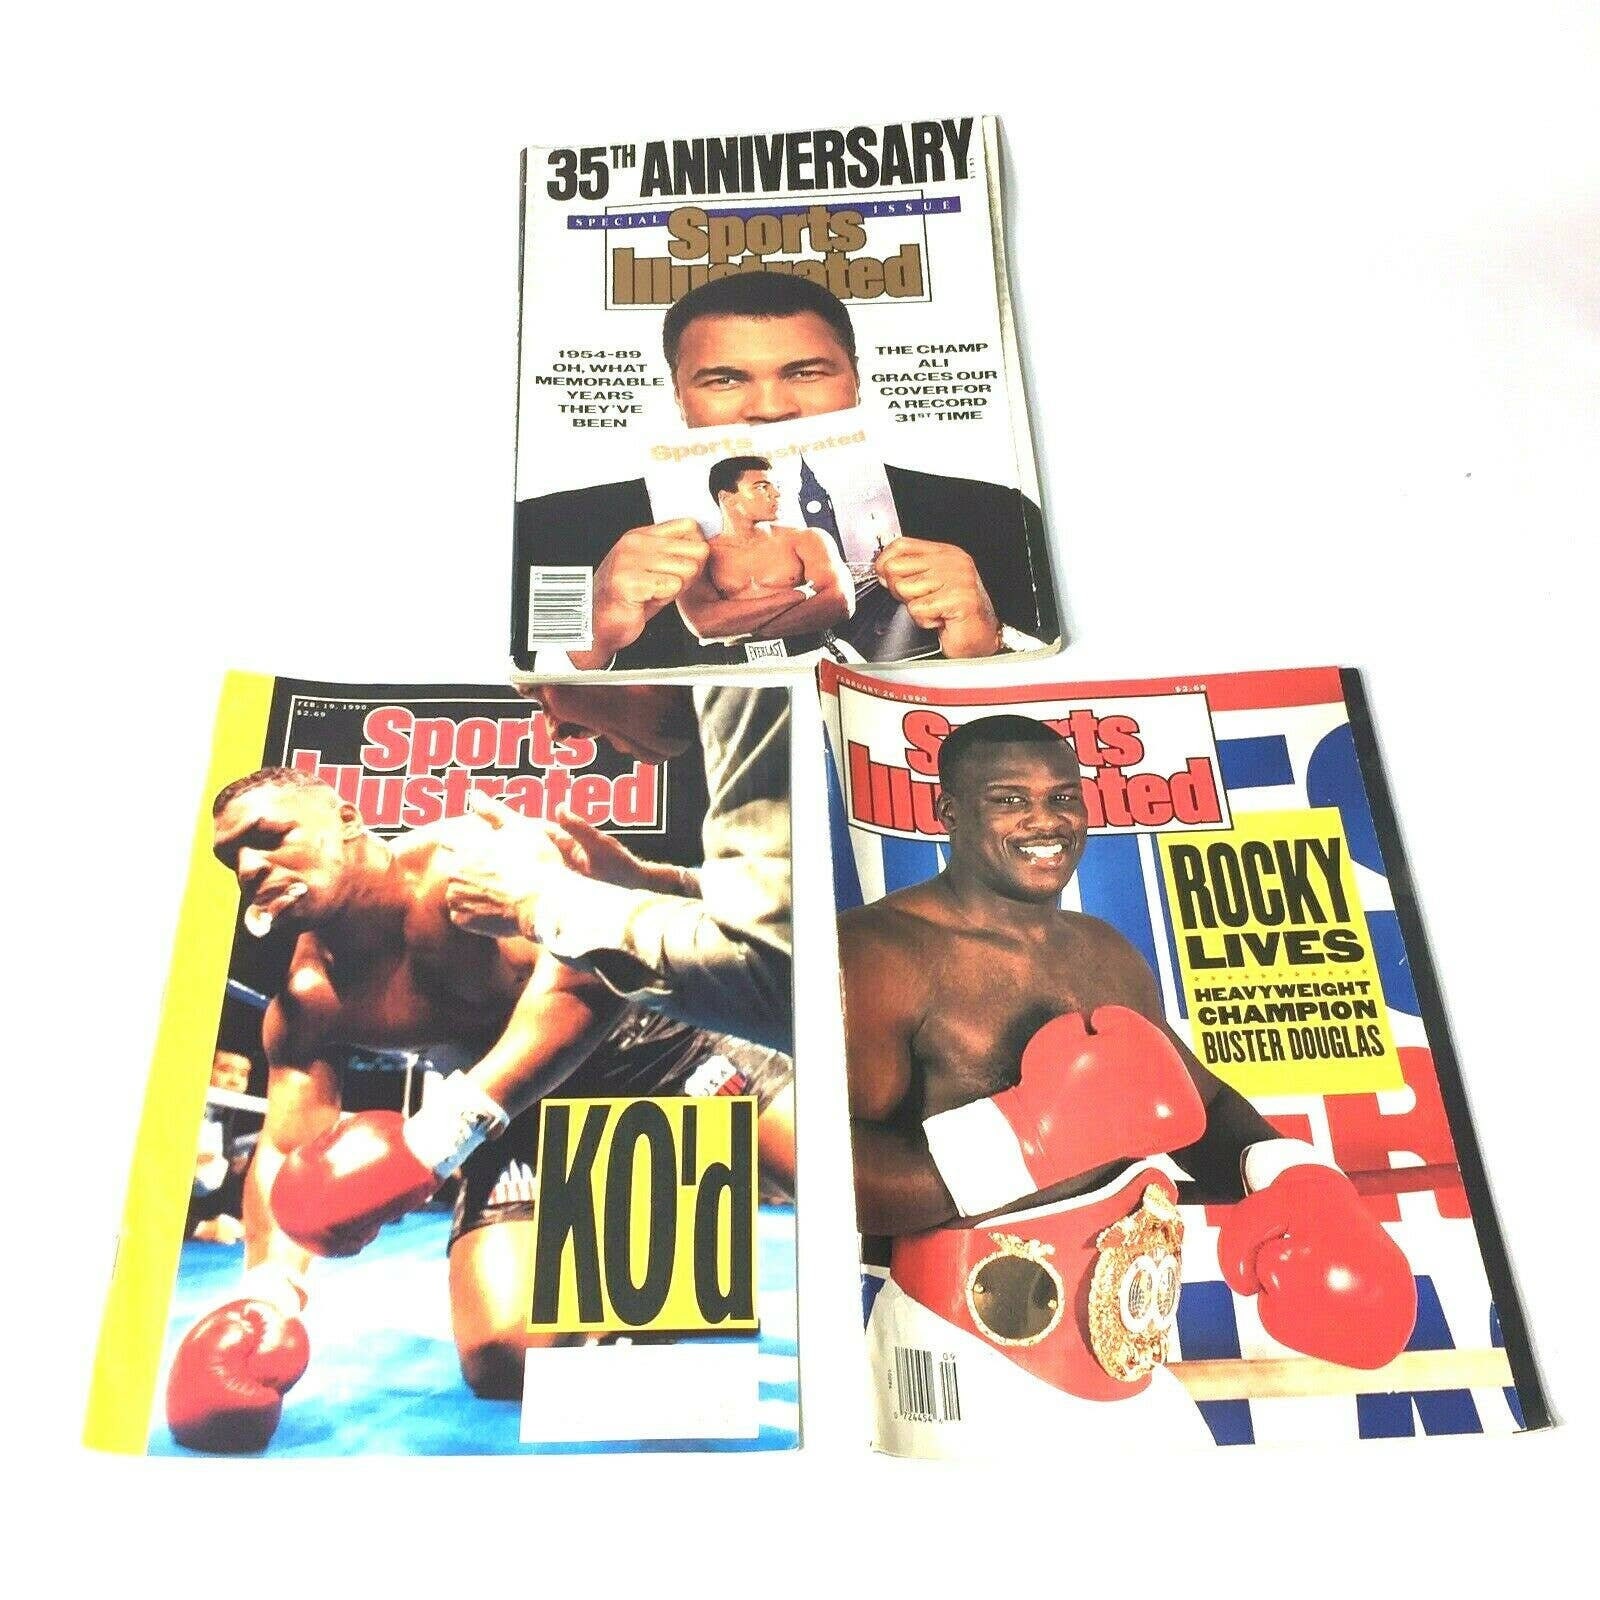 Buster Douglas, Heavyweight Boxing Sports Illustrated Cover Metal